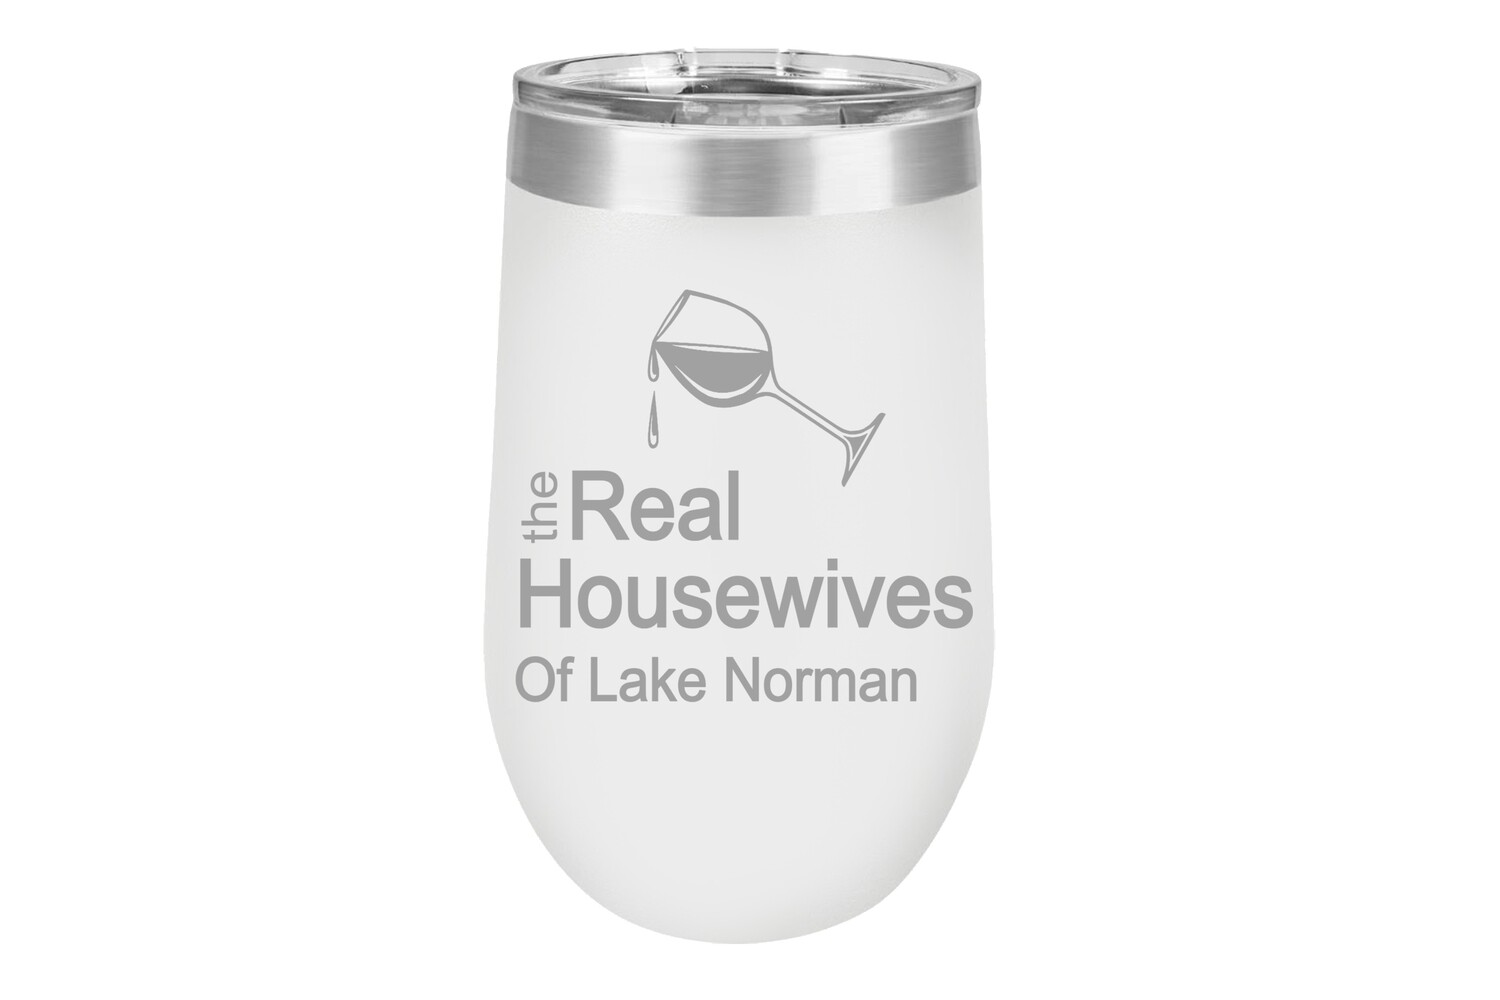 The Real Housewives of (Choose Image and Add Location) 16 oz Insulated Tumbler